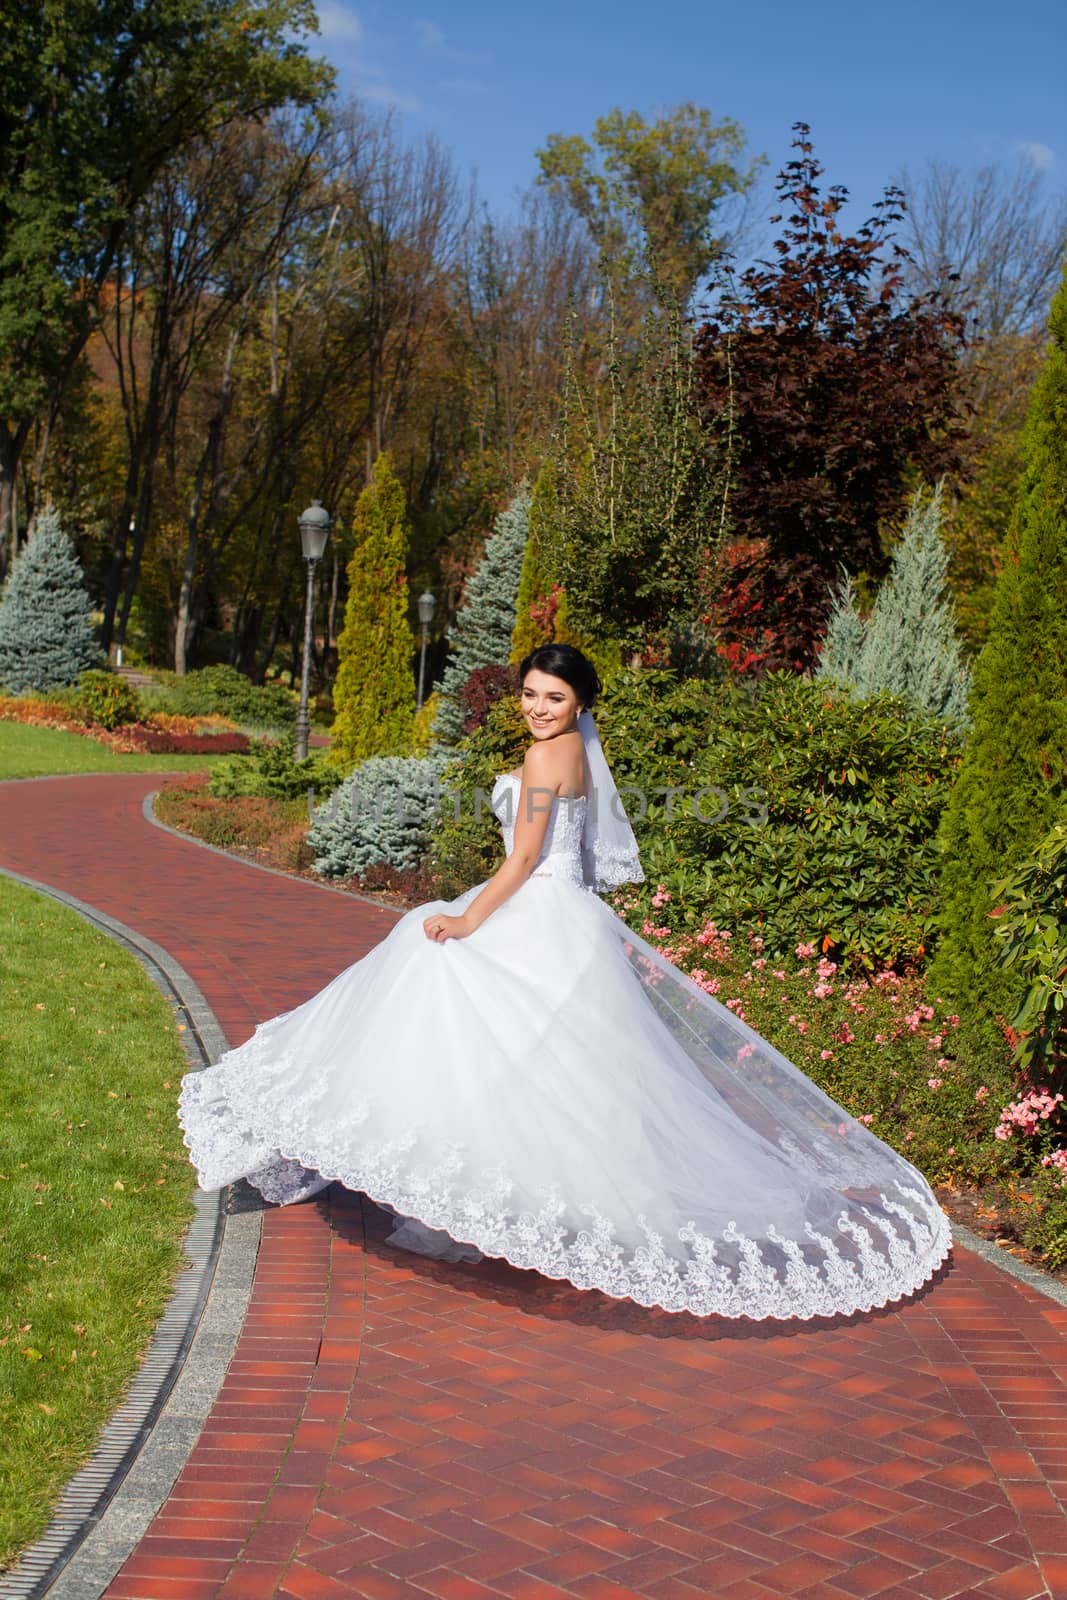 Bride on a promenade in a summer park by lanser314